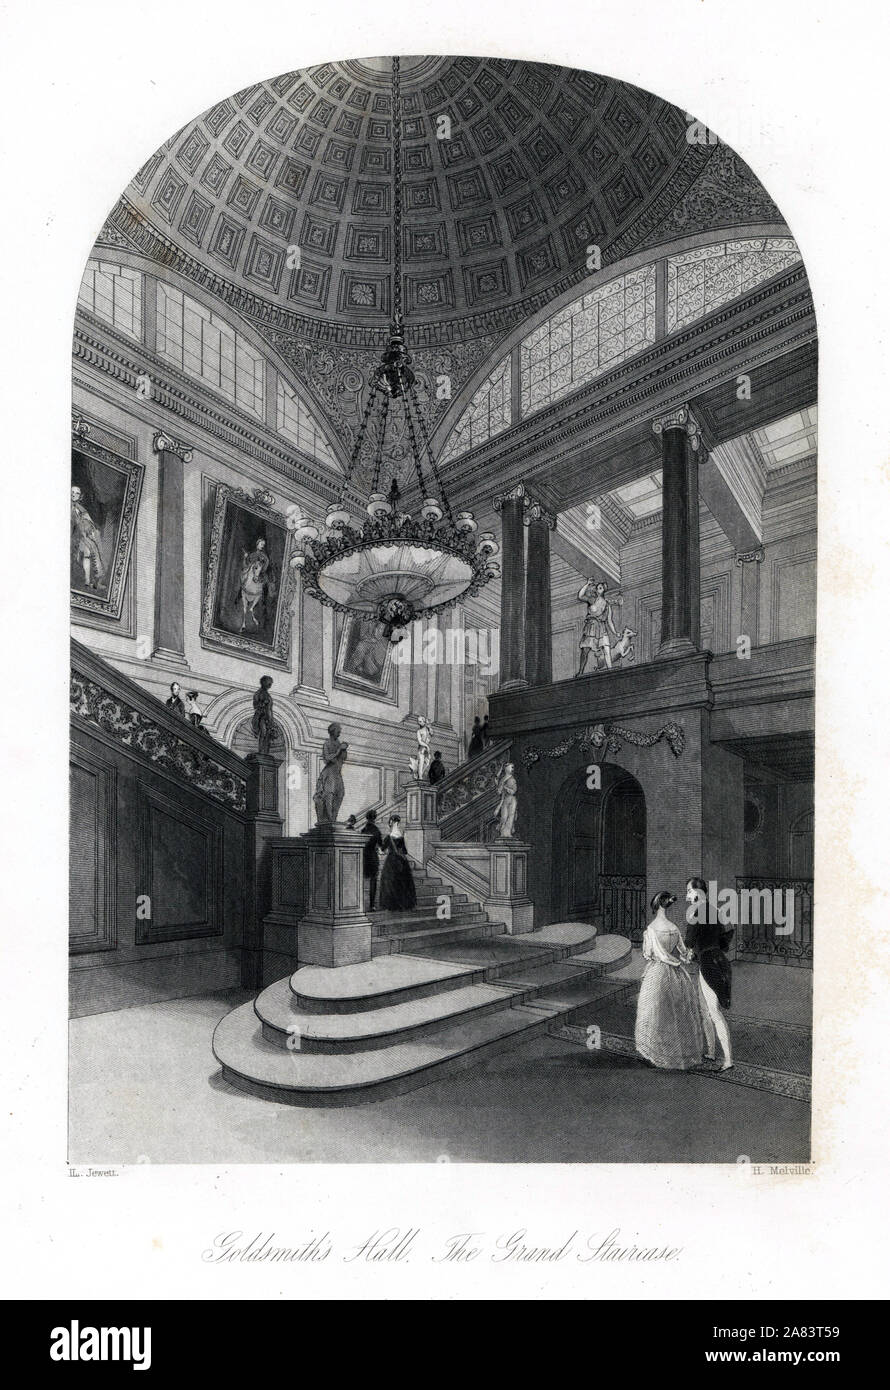 The grand staircase, Goldsmith's Hall. Steel engraving by Henry Melville after an illustration by Llewellyn Jewitt from London Interiors, Their Costumes and Ceremonies, Joshua Mead, London, 1841. Stock Photo